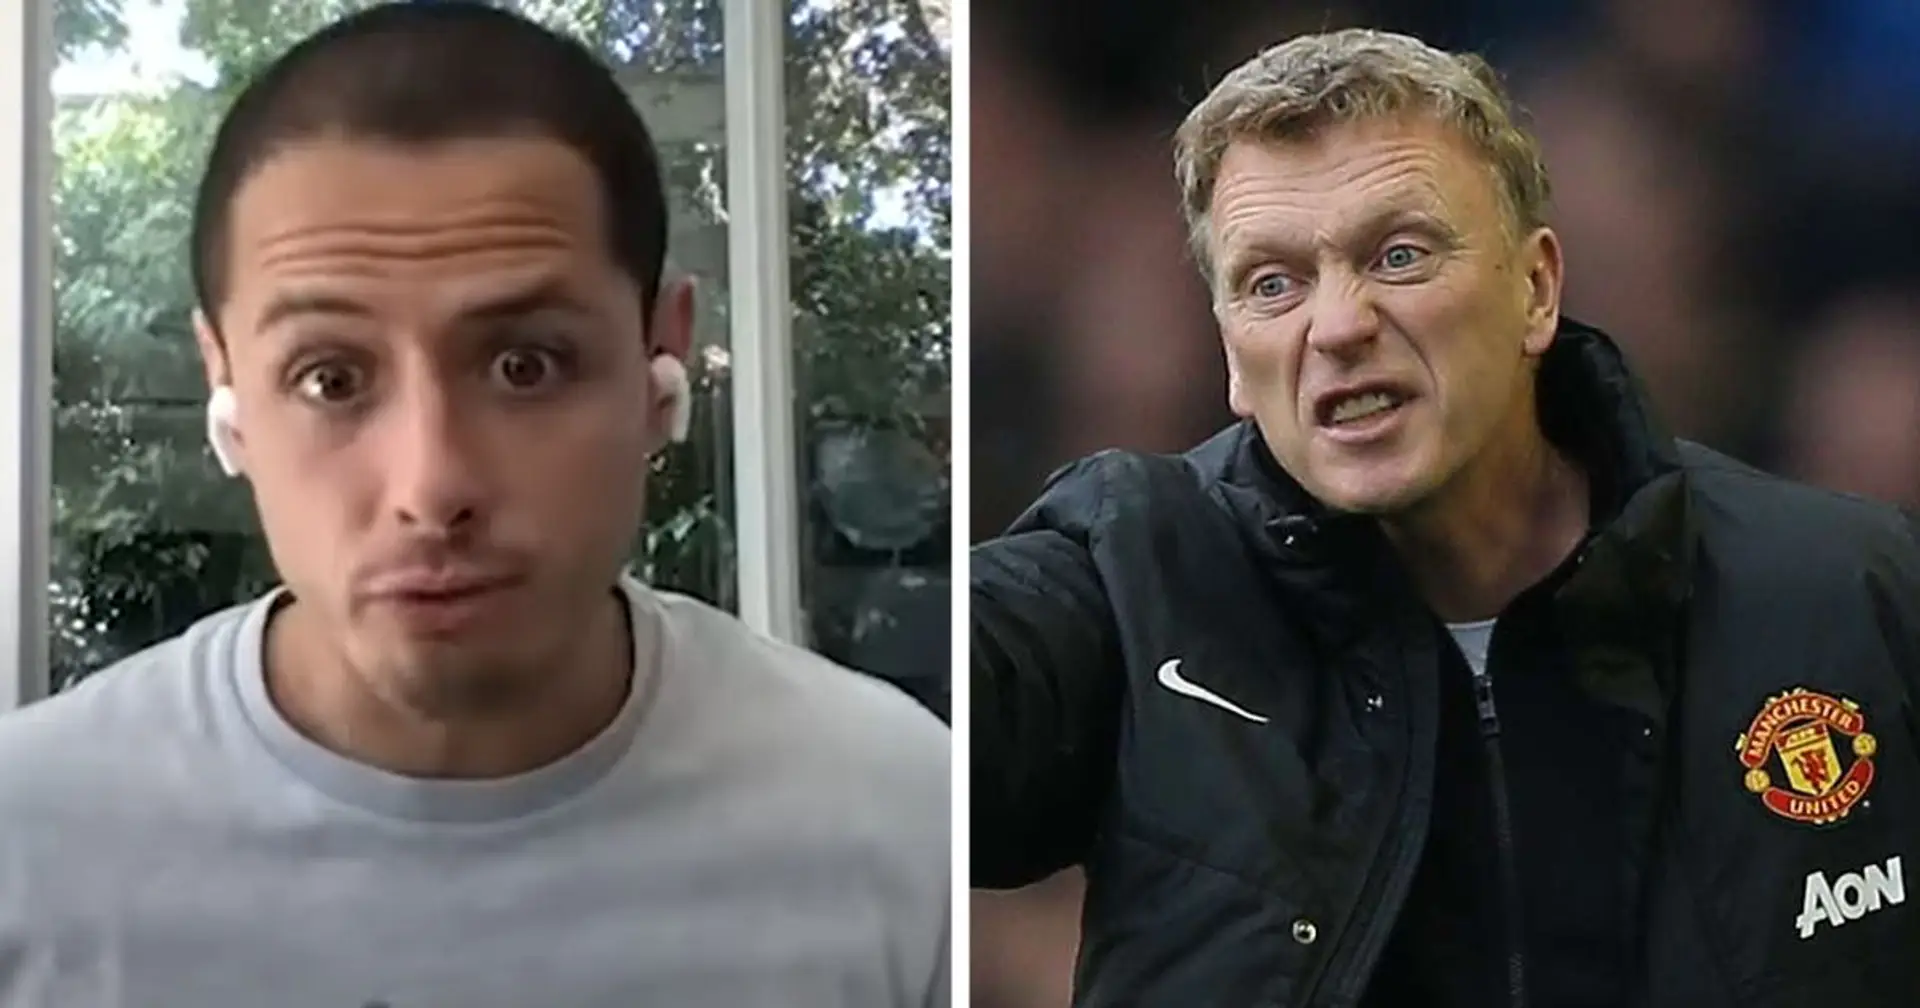 ‘They told me 'You’re going to play' and then they didn’t play me!’: Javier Hernandez reveals how Moyes & Woodward broke promise to him